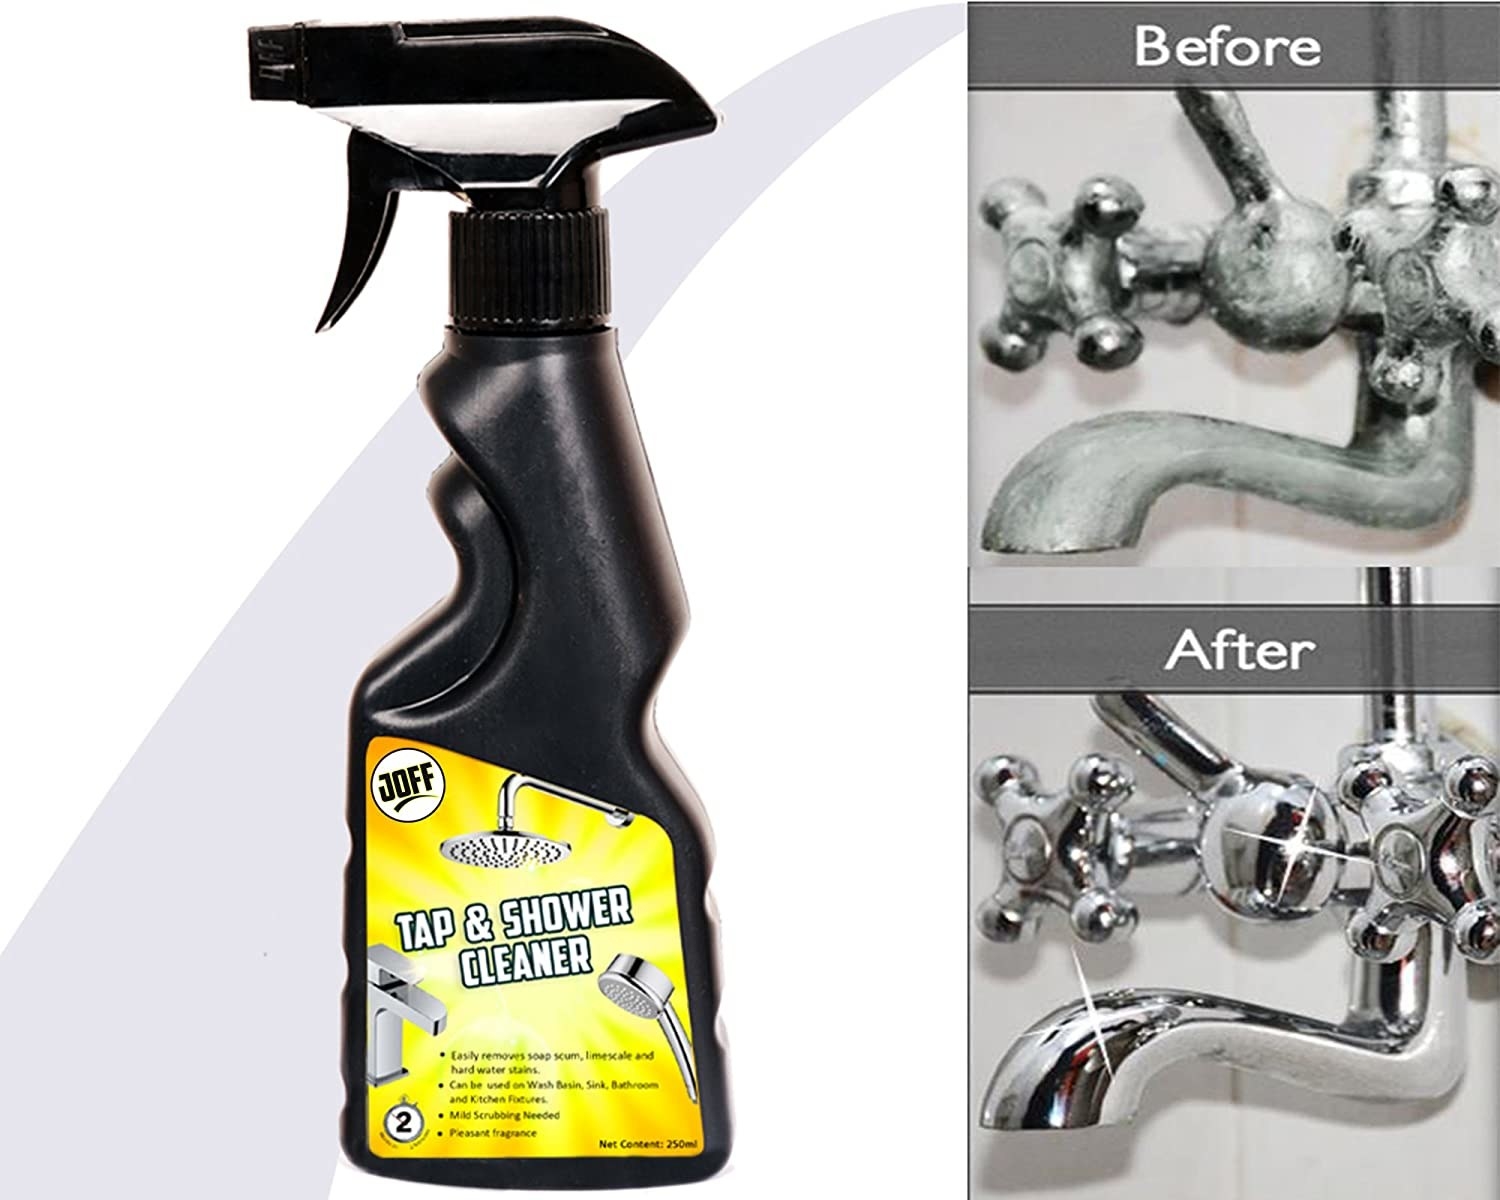 The bottle of the tap and shower cleaner next to a before an after image of a tap cleaned with it